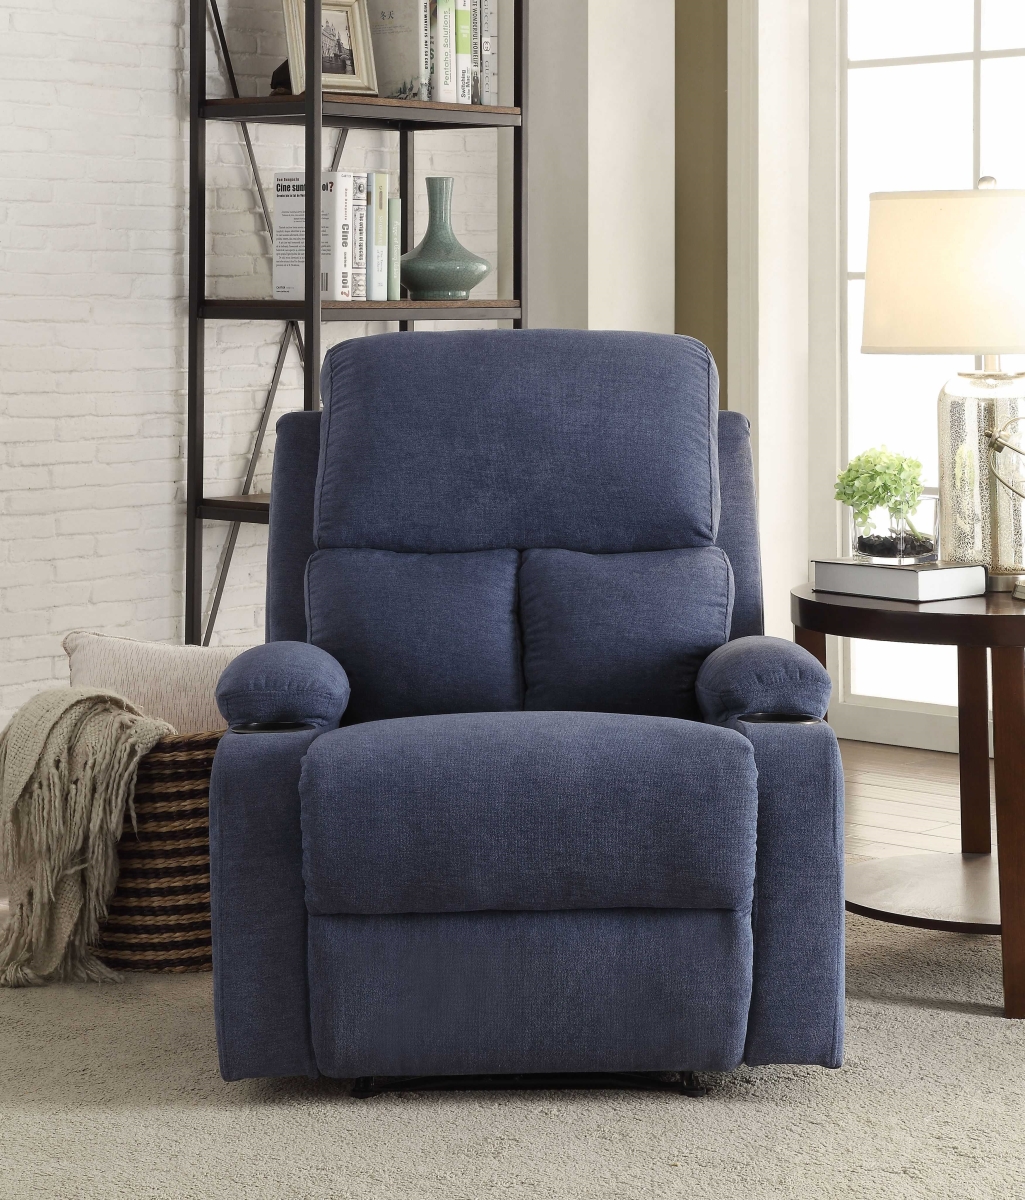 Home Roots Furniture 286182 39 X 32 X 37 In. Linen Fabric & Wood Frame Recliner - Chocolate